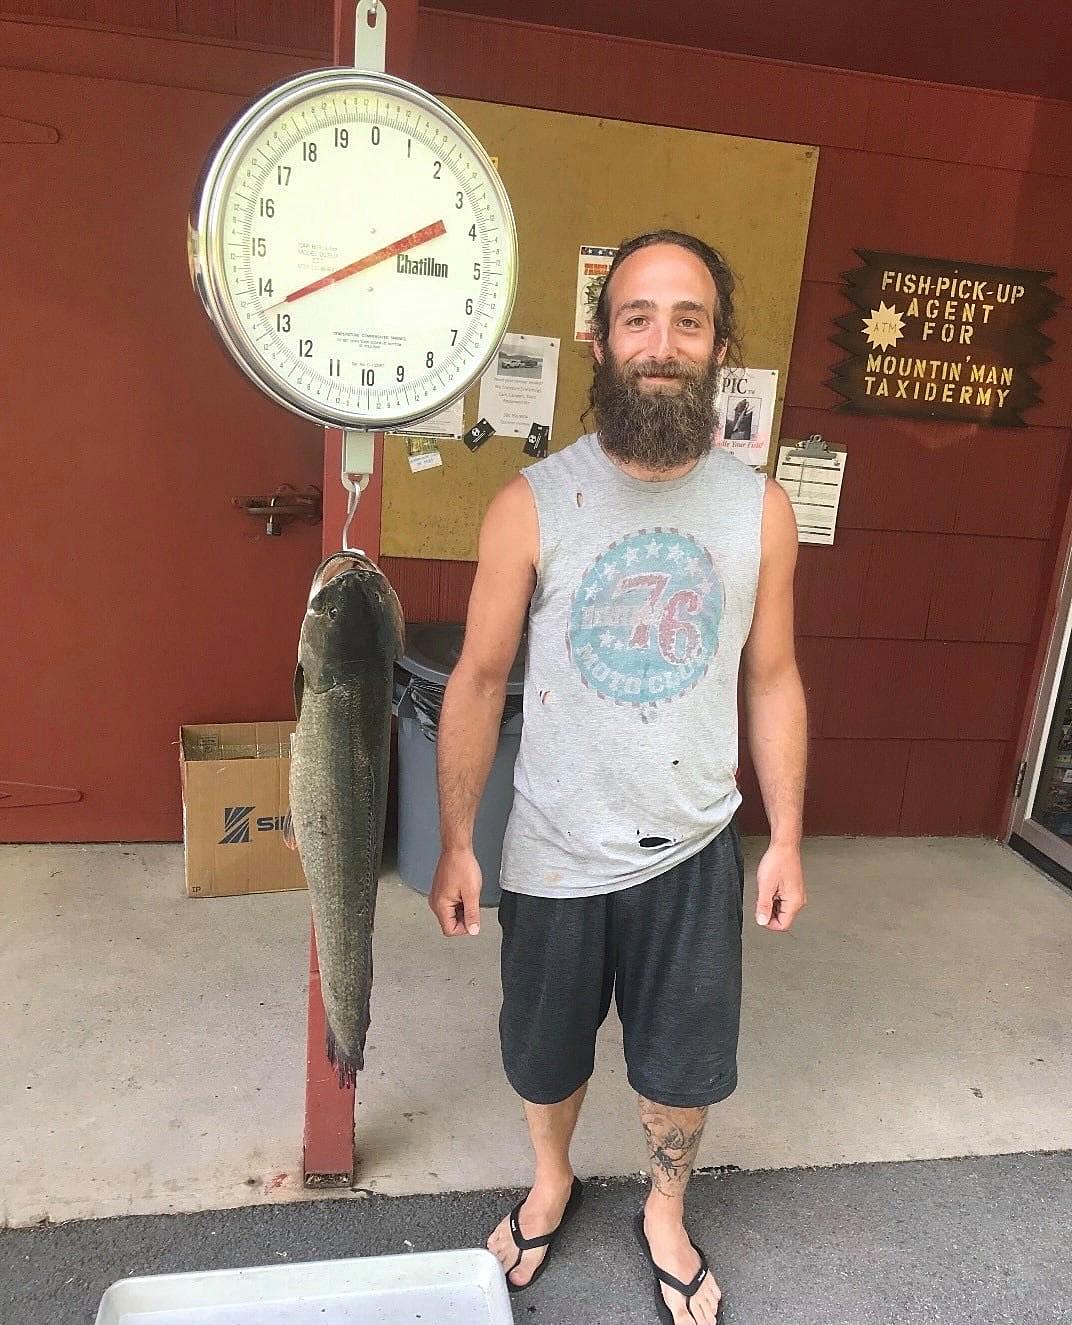 2 Record Fish Caught in New York, 1 Fish Called a 'Living Fossil